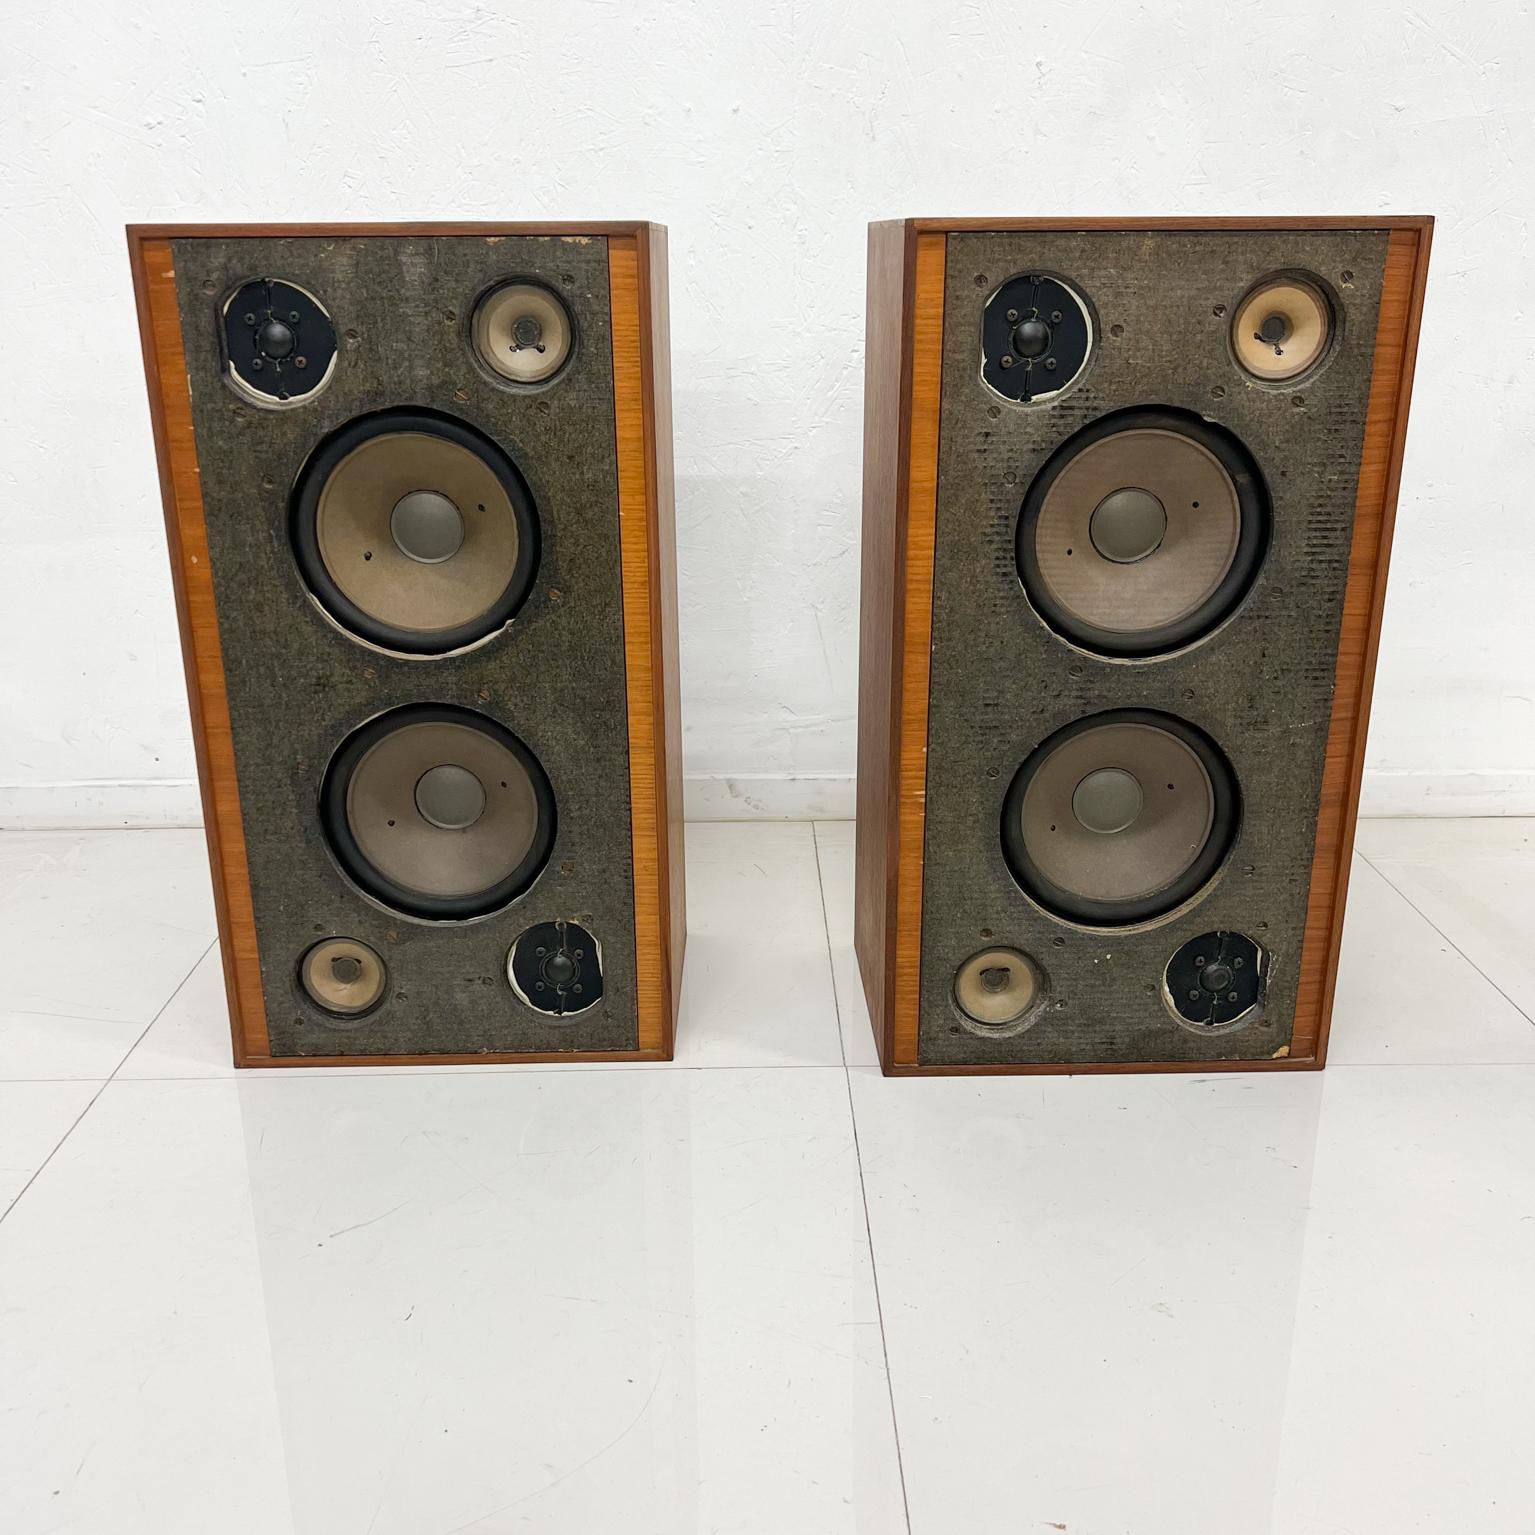 1960s Pair of vintage grundig HiFi loud speakers from Germany.
Walnut wood frame. No covers. Specs are on the back.
Measures: 25.75 tall x 14.25 wide x 10 deep.
Preowned unrestored vintage condition.
See images please.